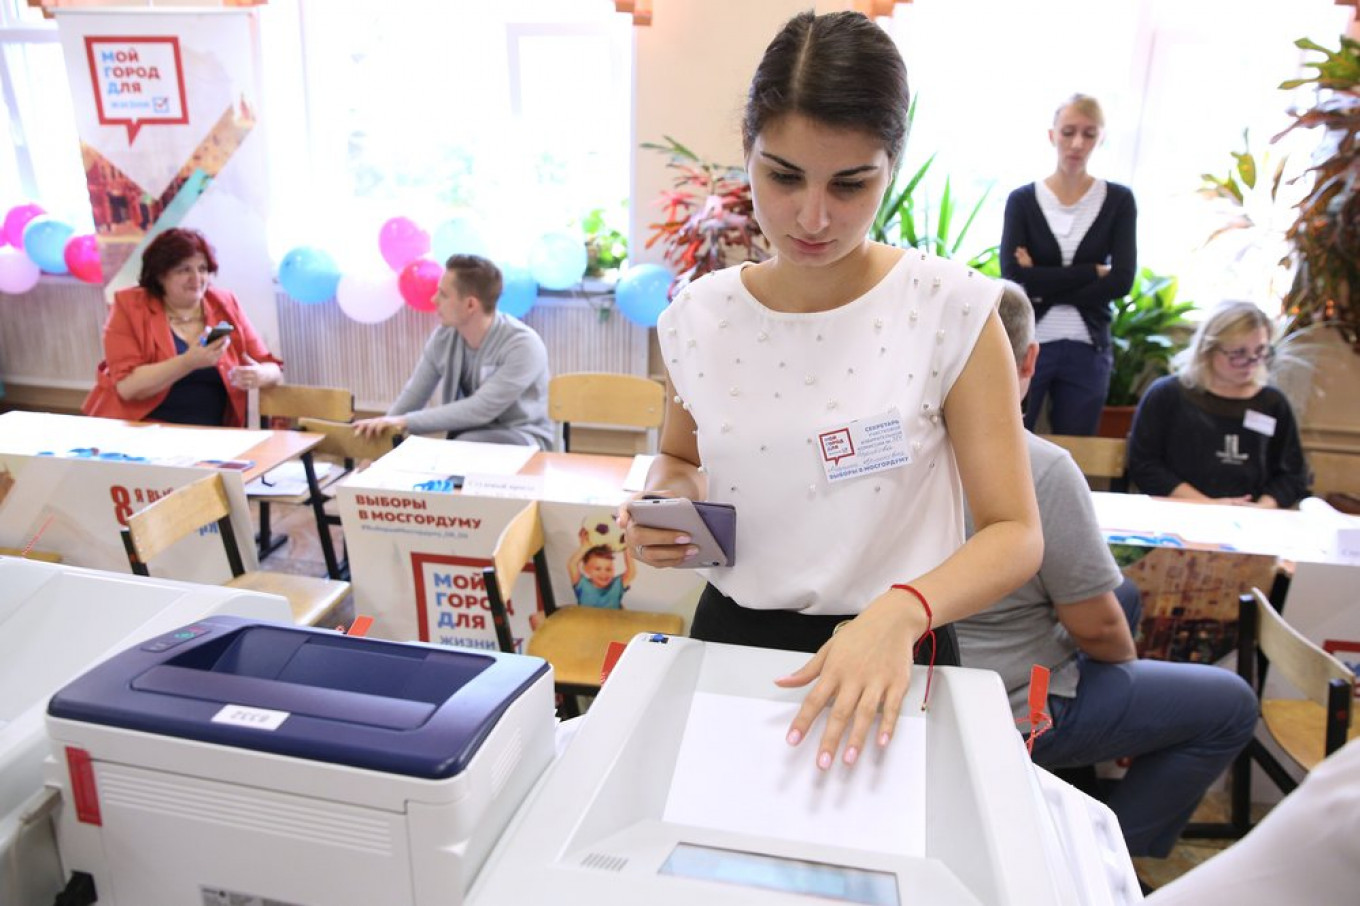 After a Turbulent Year in Russian Domestic Politics, What Does 2020 Hold in Store?